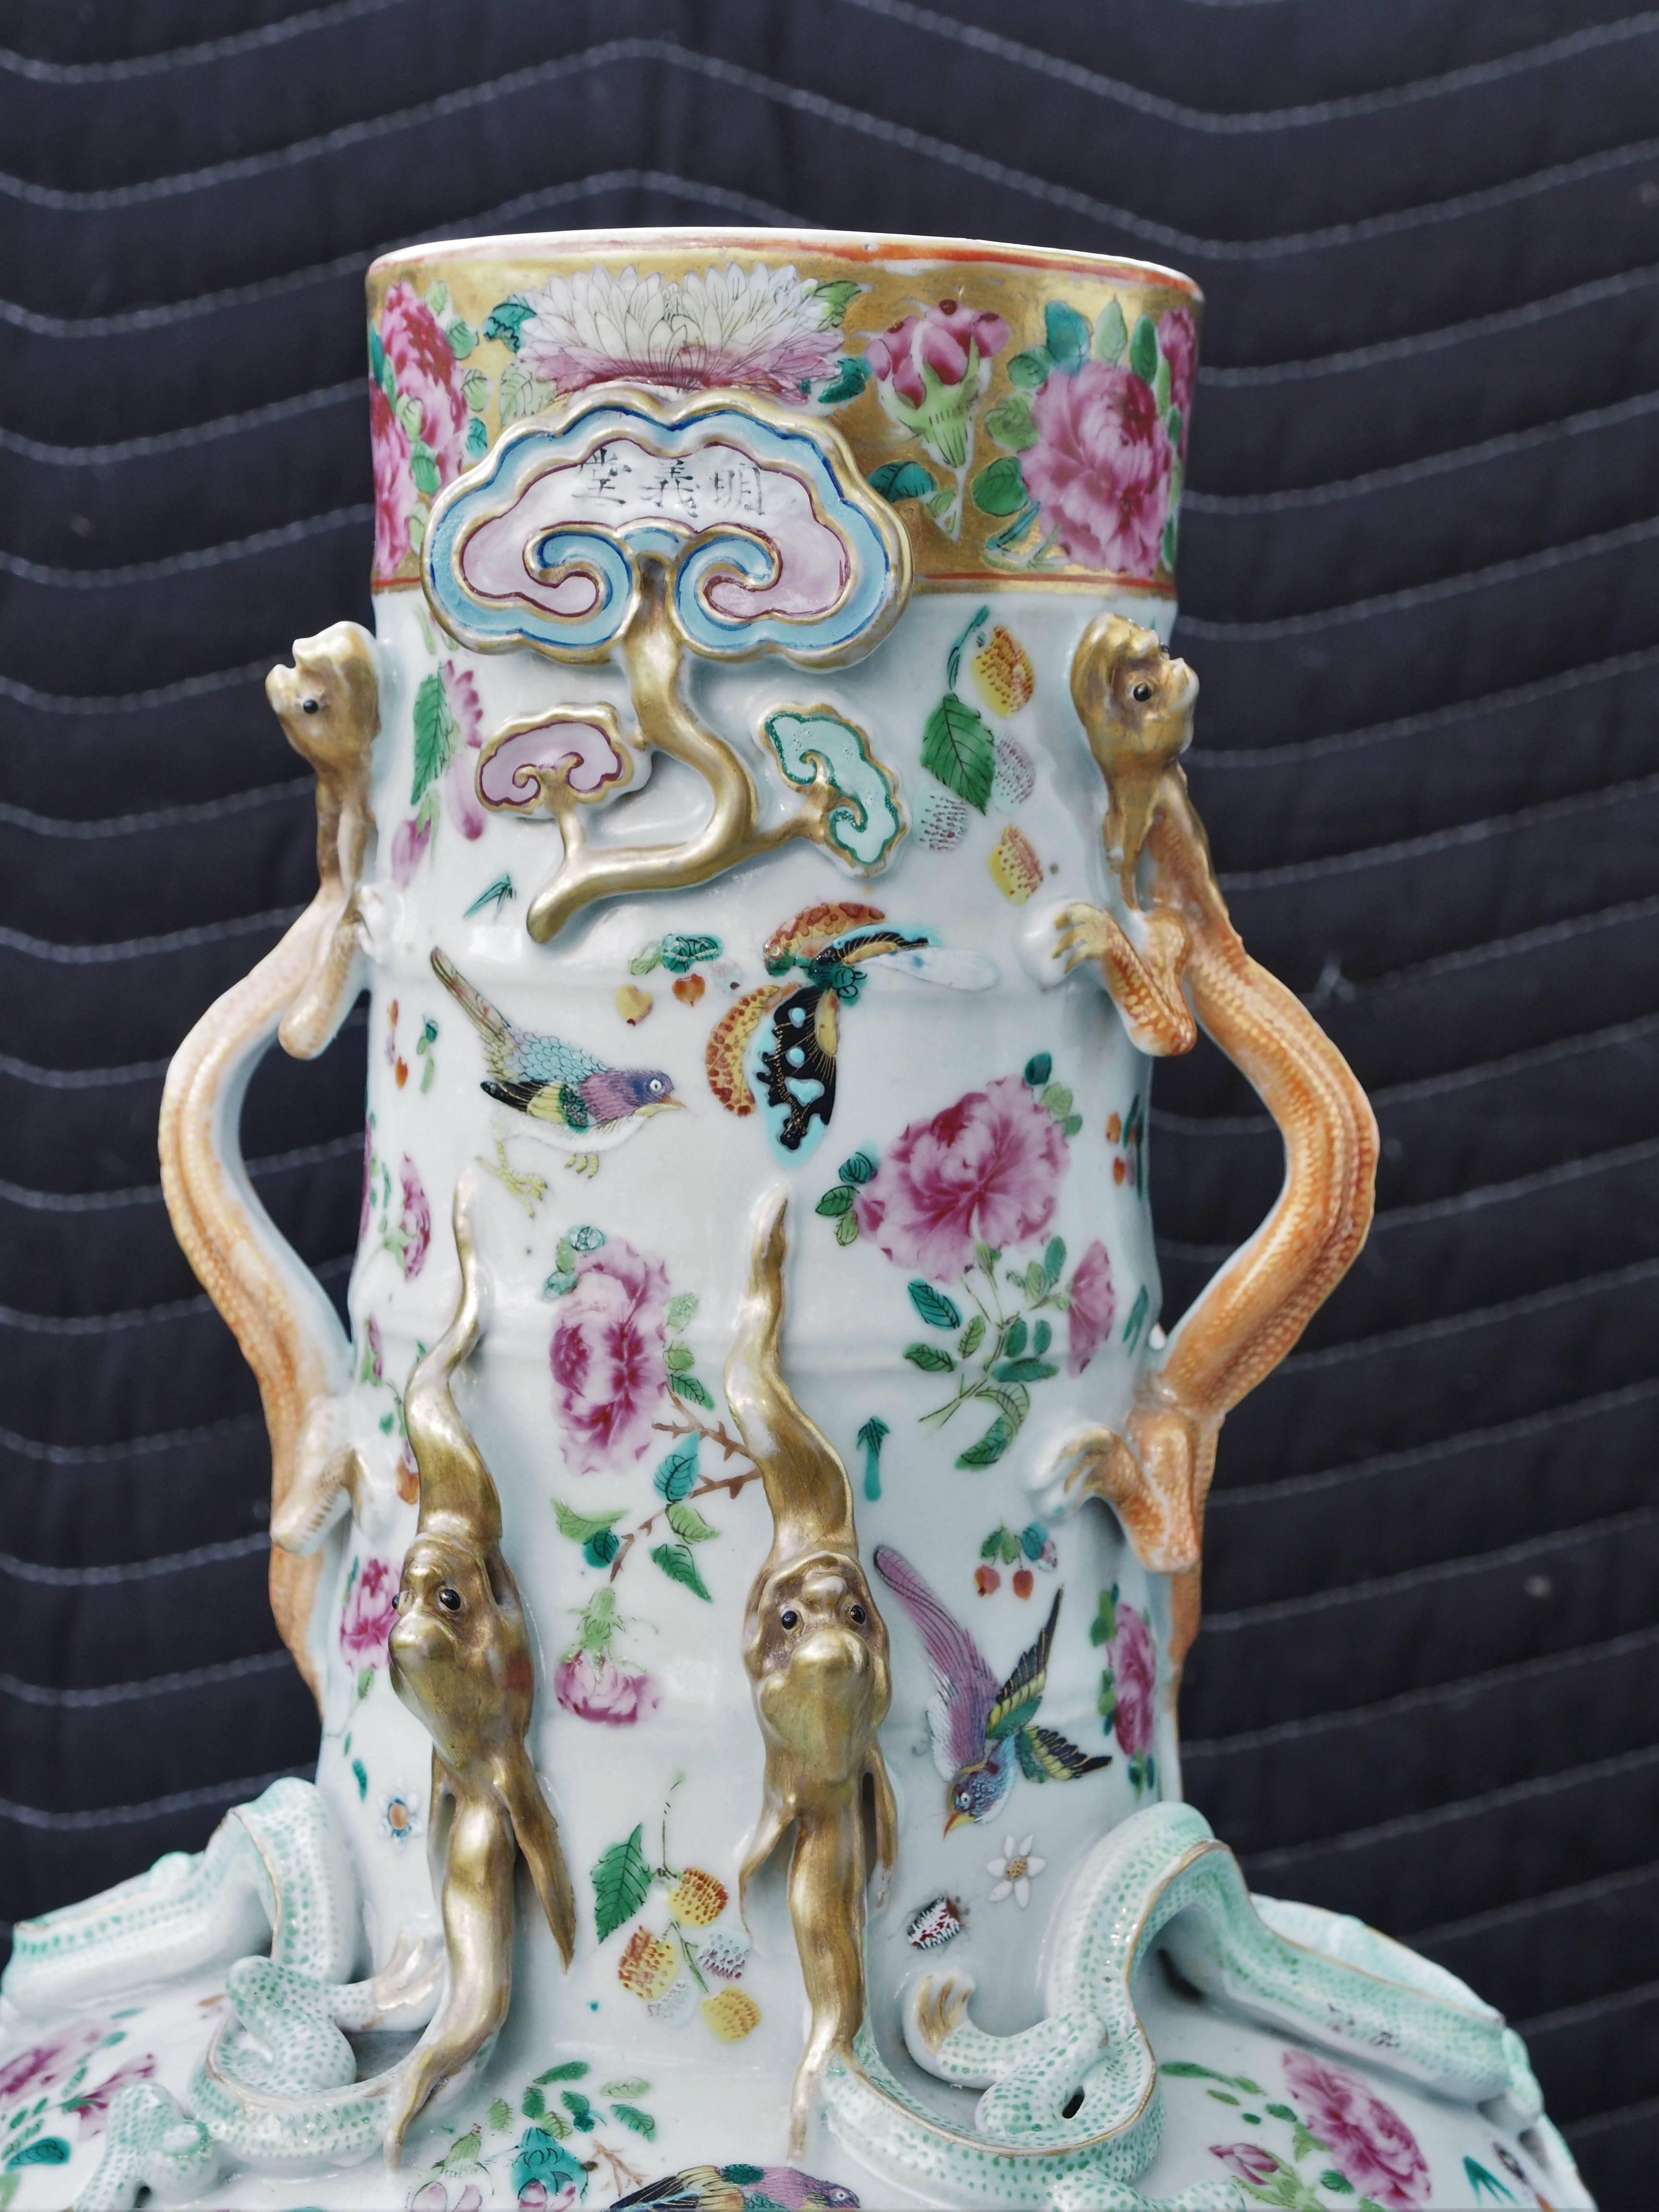 Chinese large famille rose pattern vase with salamanders and snakes.